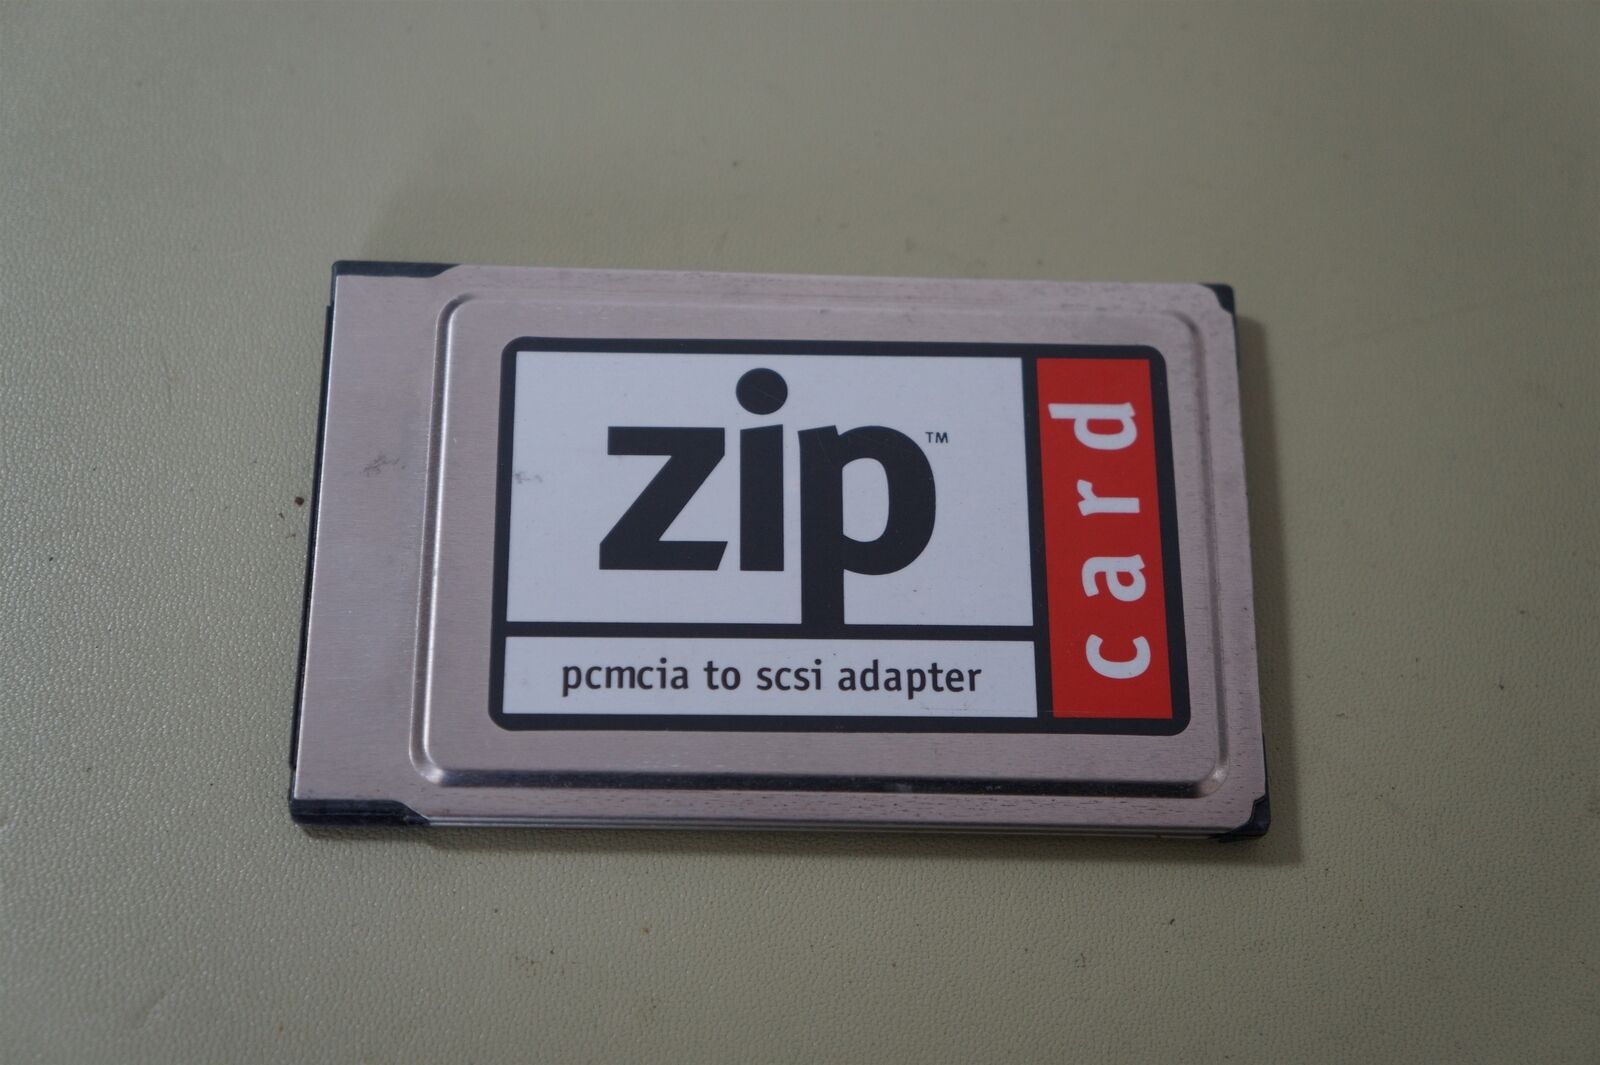 Iomega Zip Pcmcia to Scsi Adapter Card Only ( no cable)